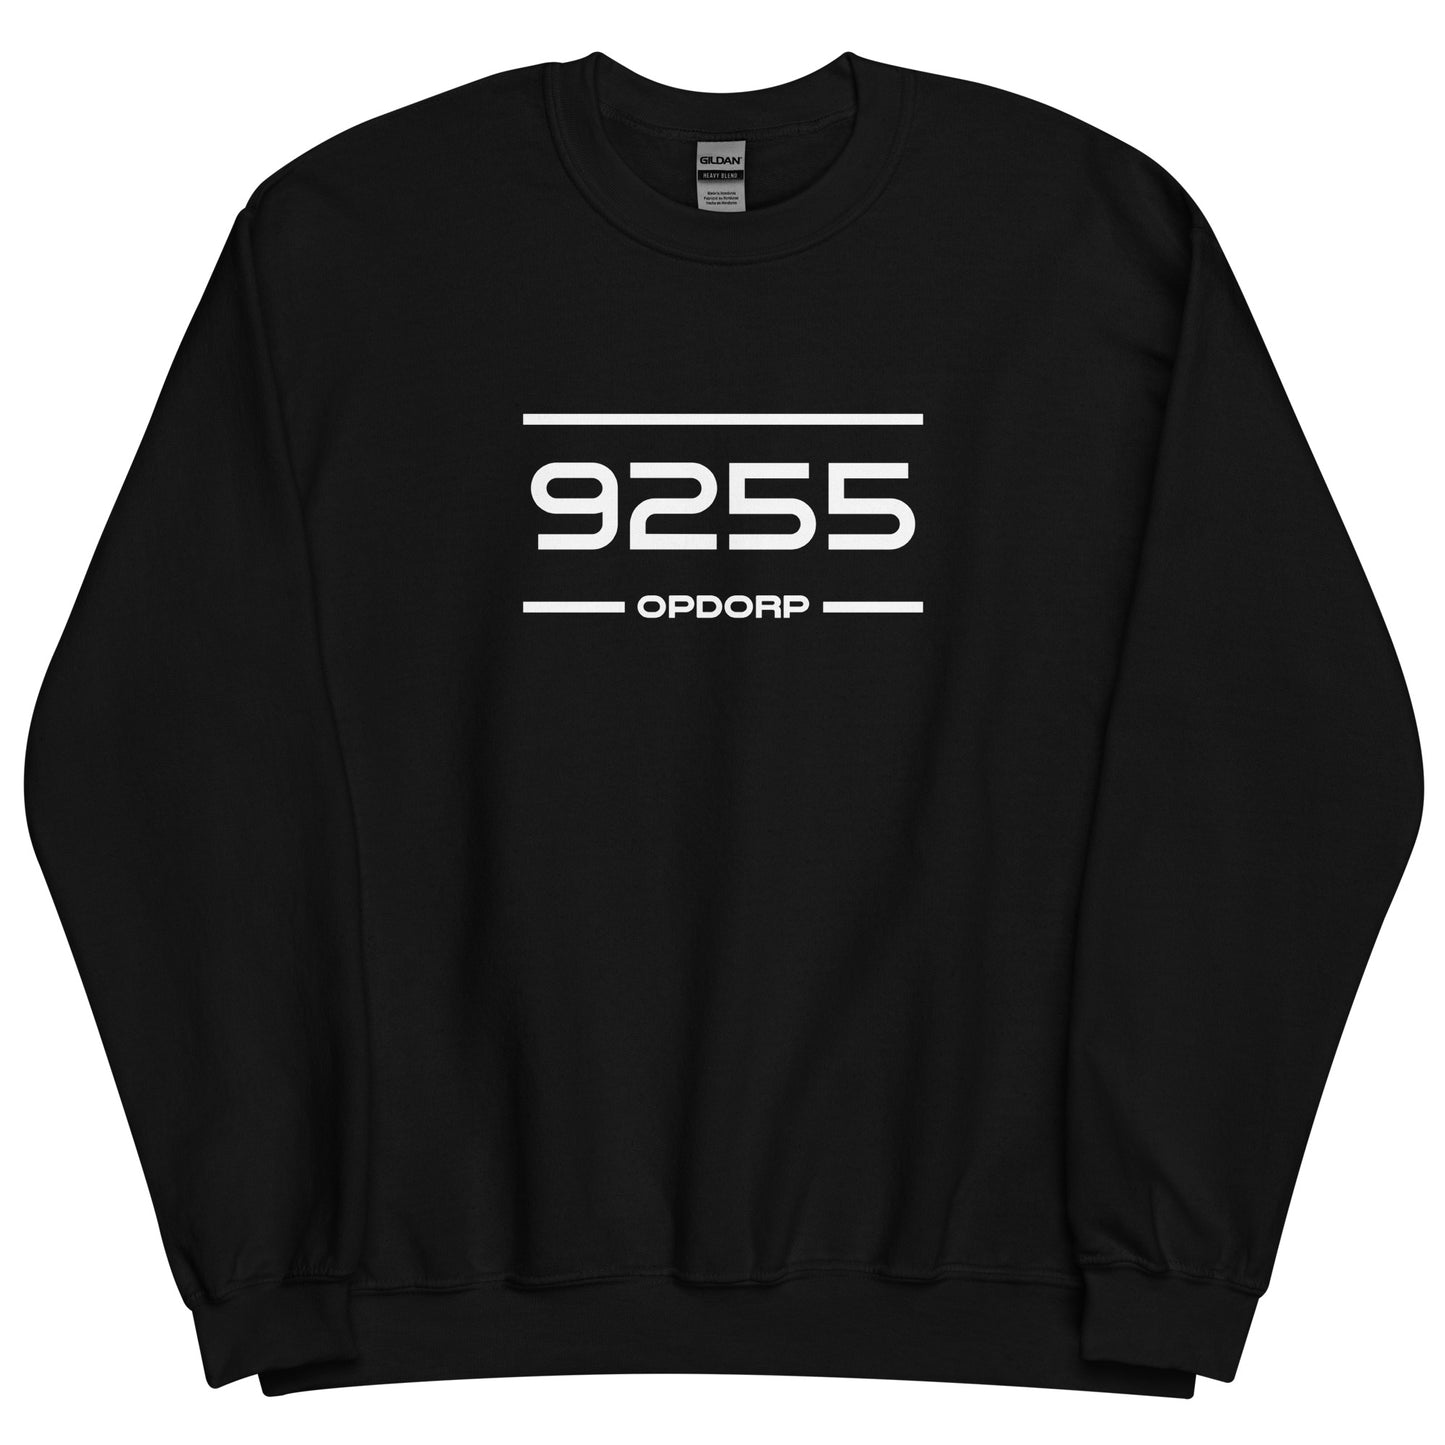 Sweater - 9255 - Opdorp (M/V)